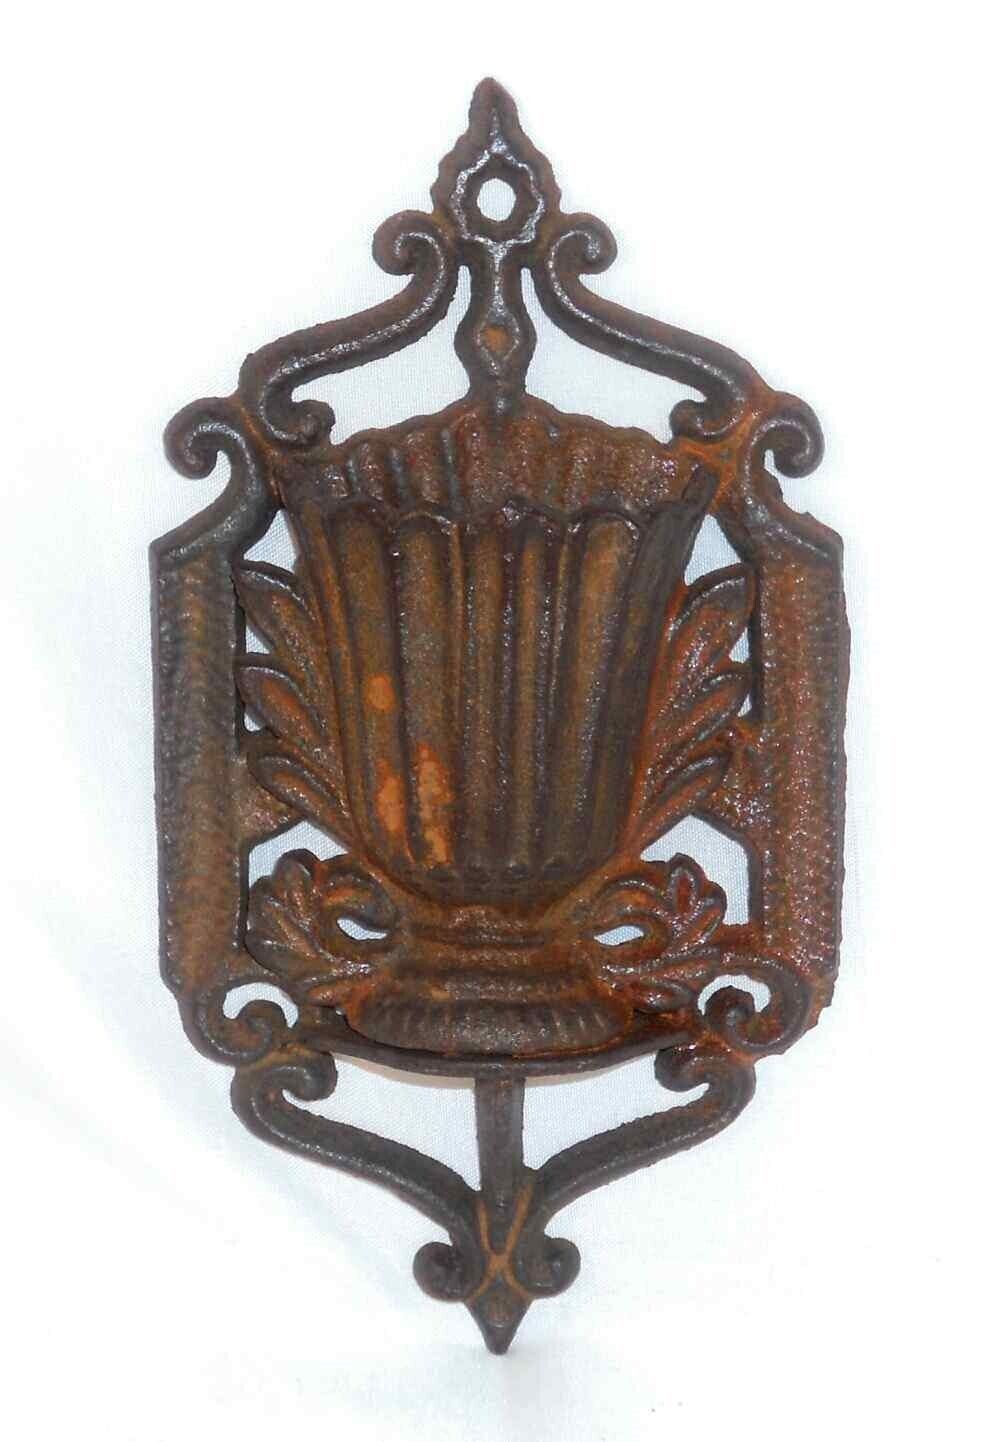 Vintage Hanging Cast Iron Urn-Shaped Match Holder with Strikers on The Front